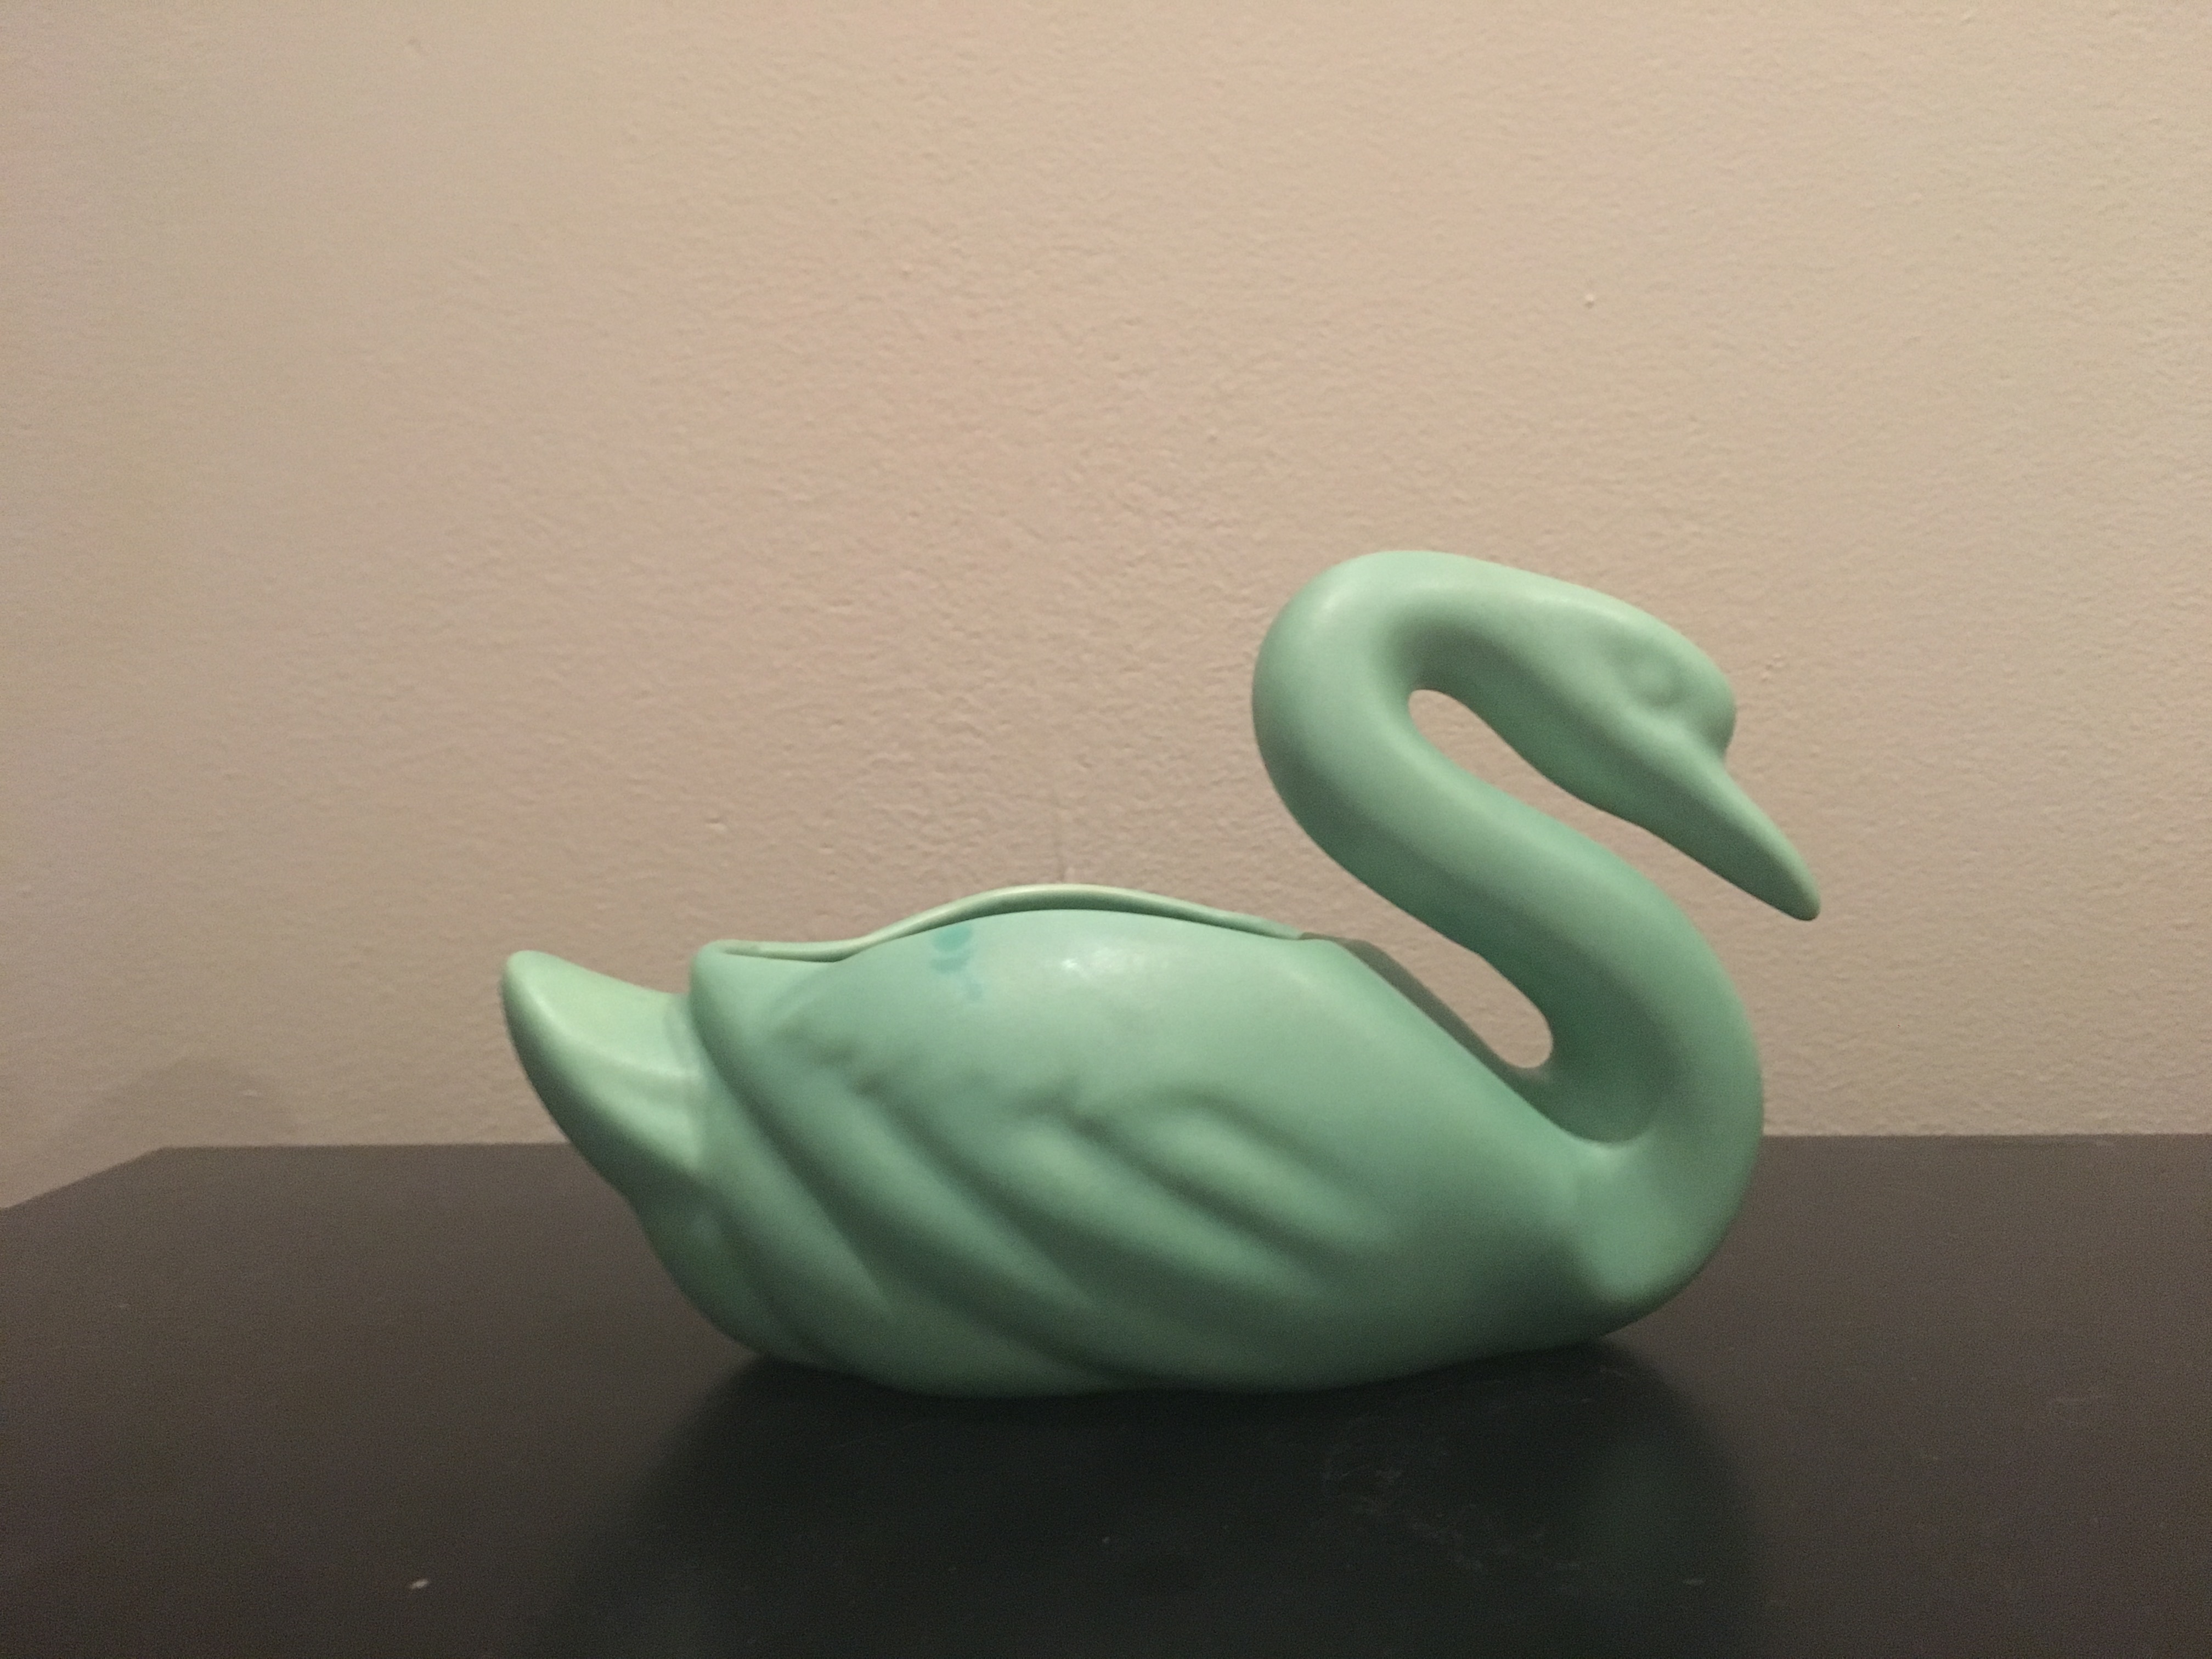 Initial Object Exploration: Swan Planter